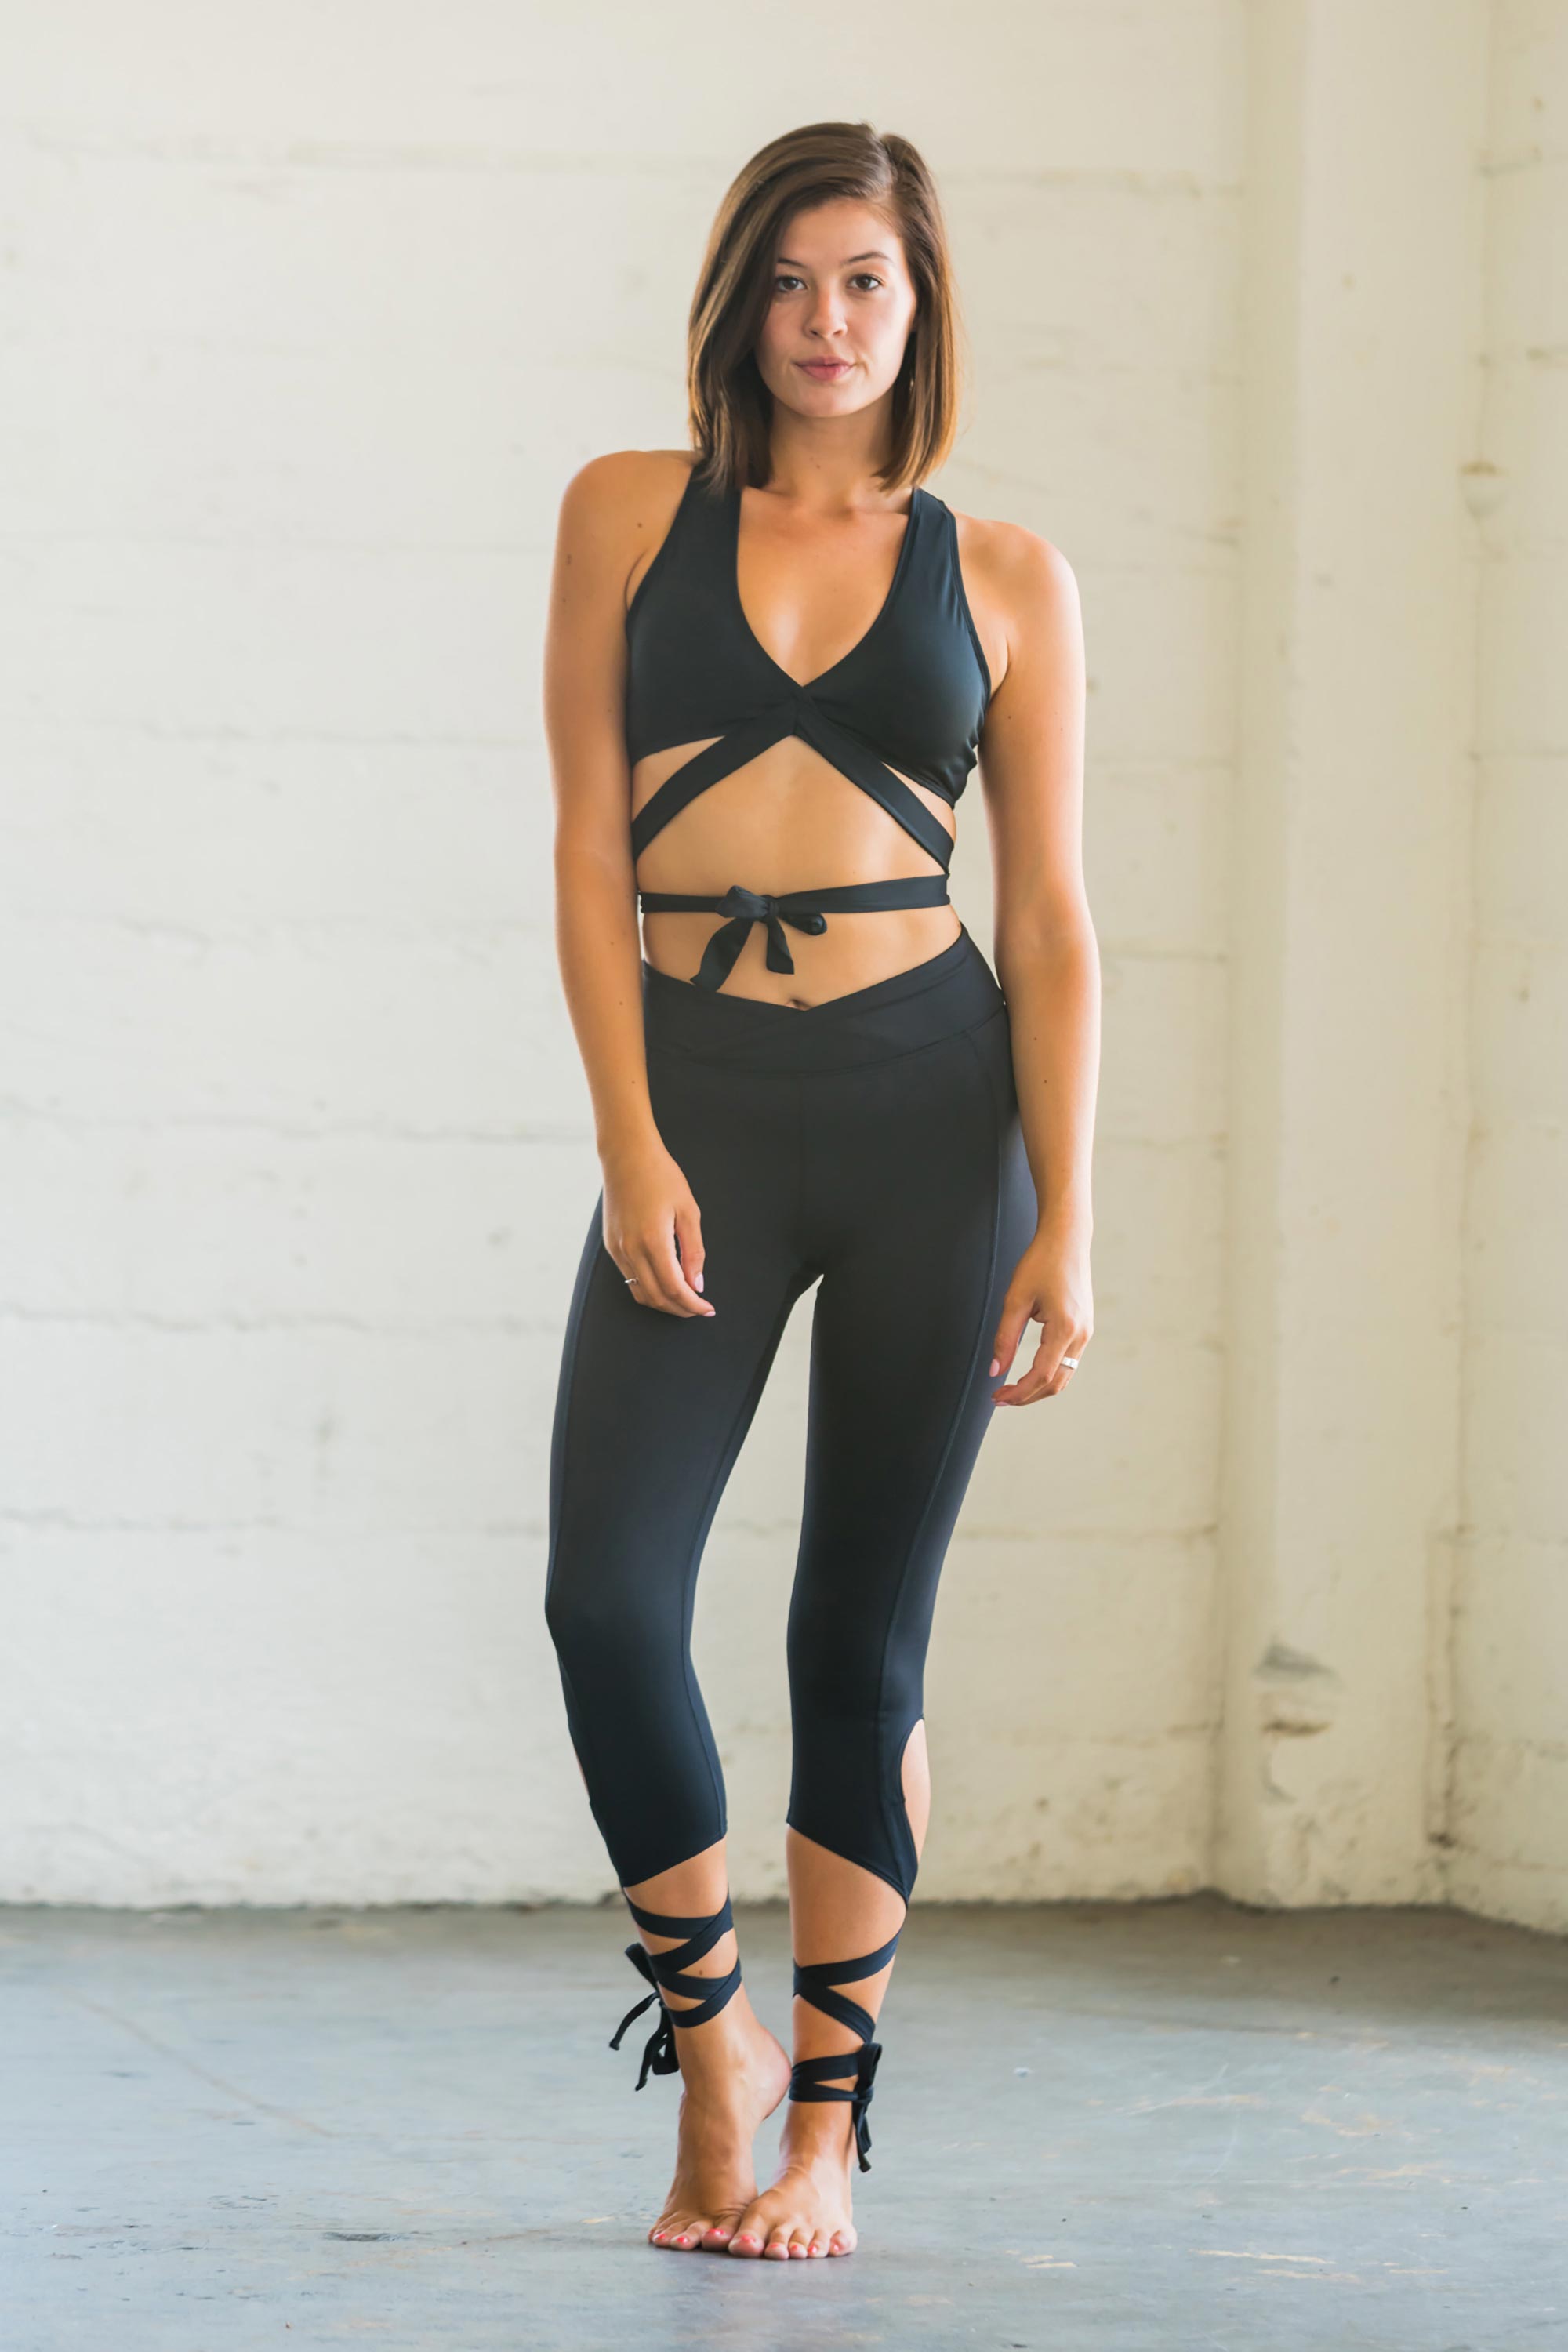 Bangkok-based activewear brand Flexi Lexi Fitness helps you stay